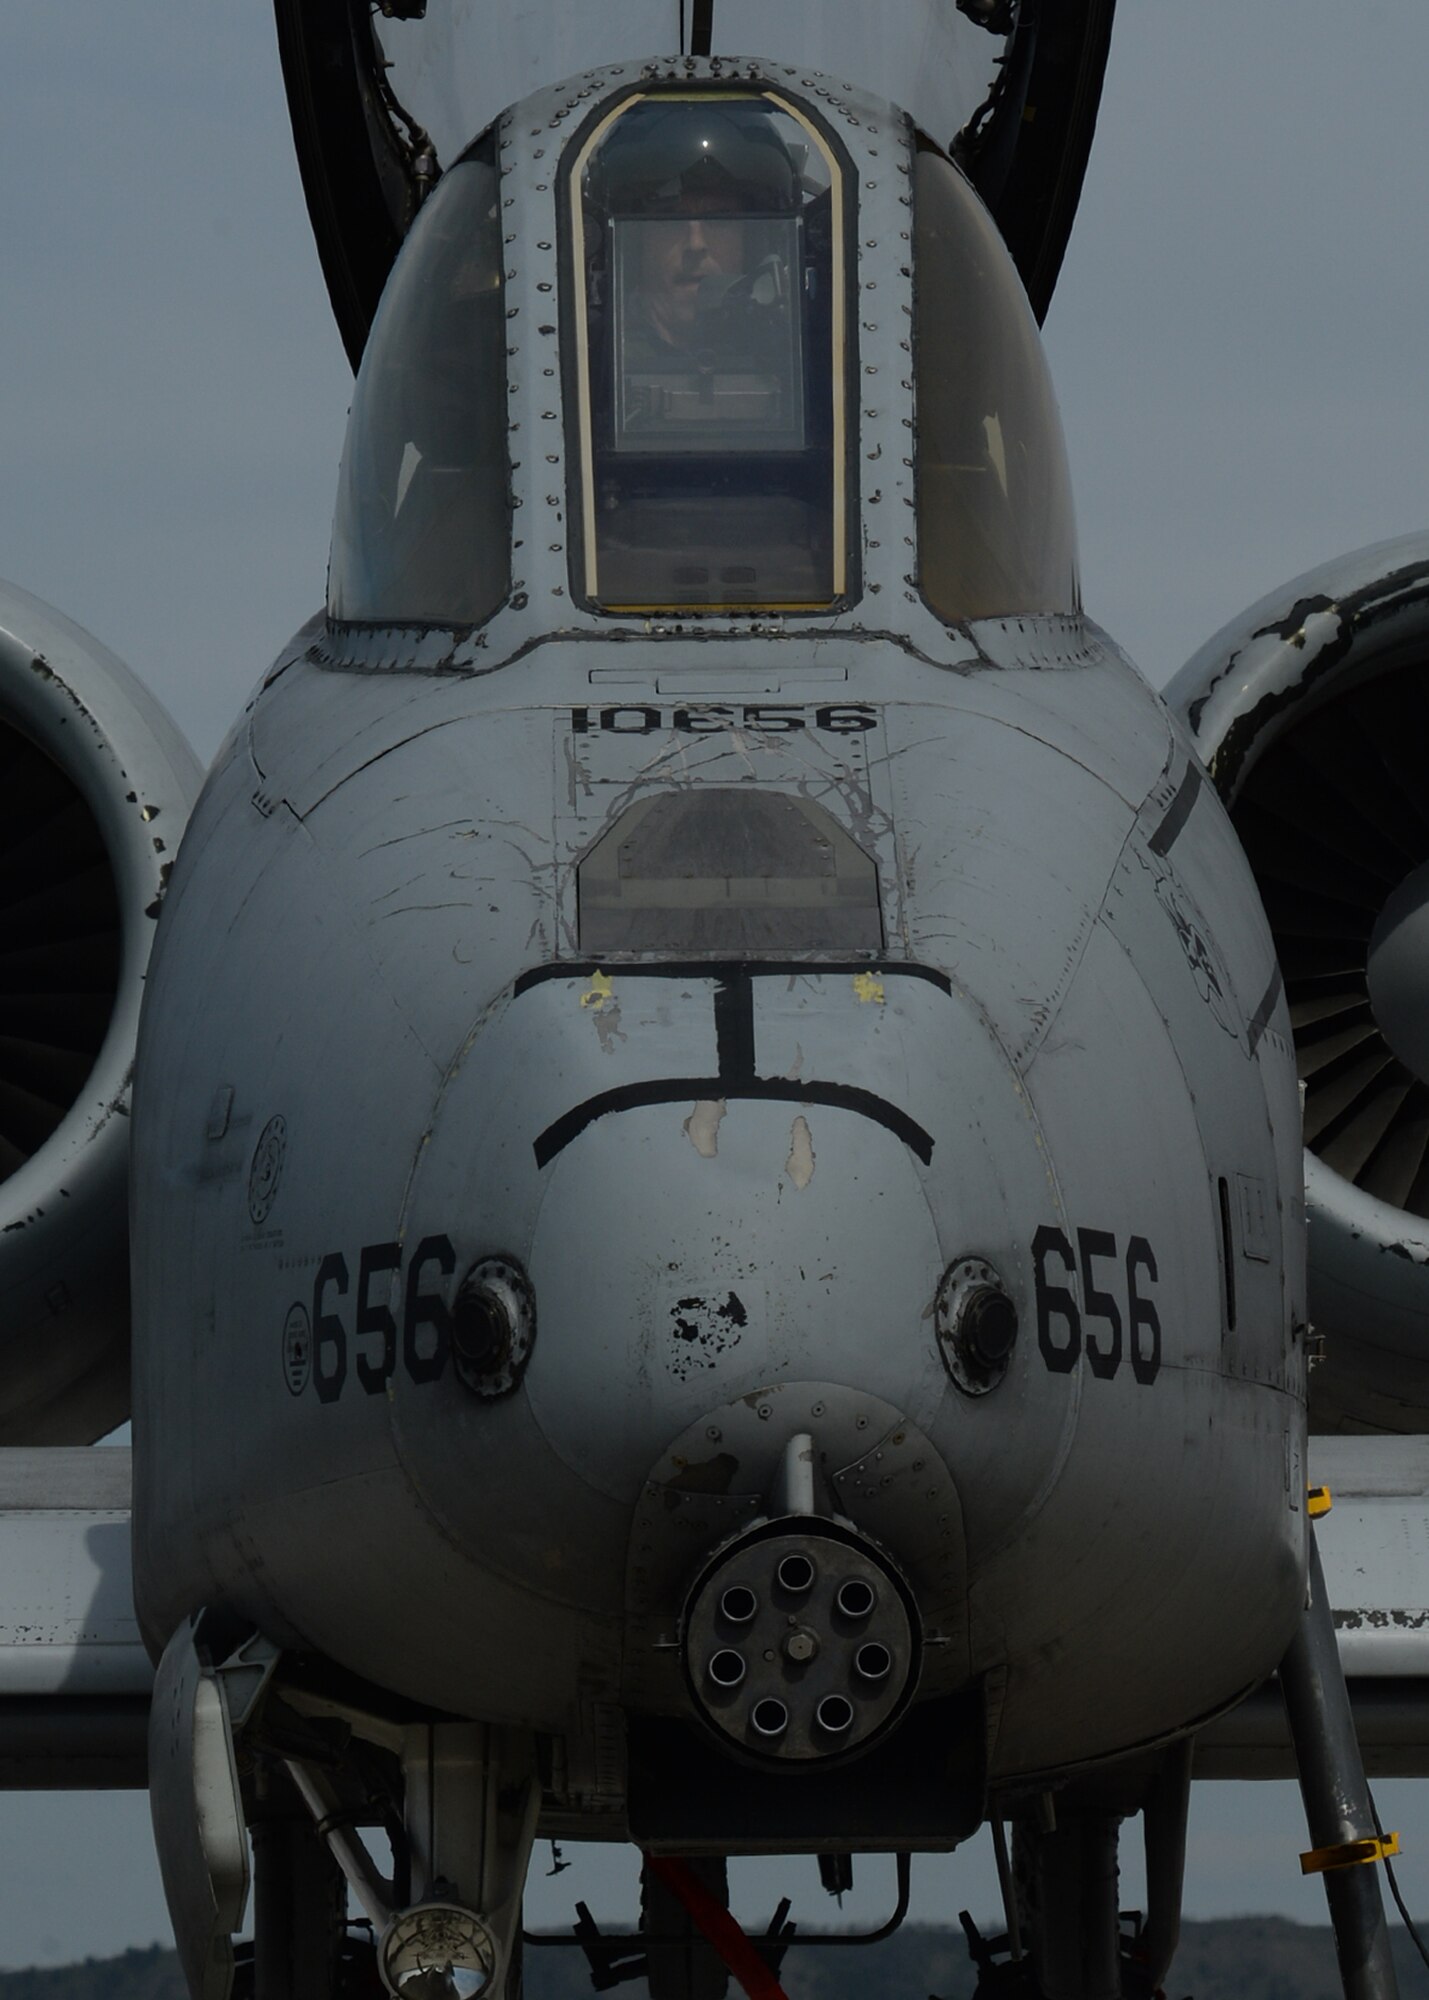 U.S. Air Force Lt. Col. Steven Behmer, 354th Expeditionary Fighter Squadroncommander, prepares to taxi an A-10 Thunderbolt II aircraft on the flightline during a theater security package deployment at Campia Turzii, Romania, April 14, 2015. The aircraft deployed to Romania in support of Operation Atlantic Resolve to bolster air power capabilities while underscoring the U.S. commitment to European security and stability. (U.S. Air Force photo by Staff Sgt. Joe W. McFadden/Released) 